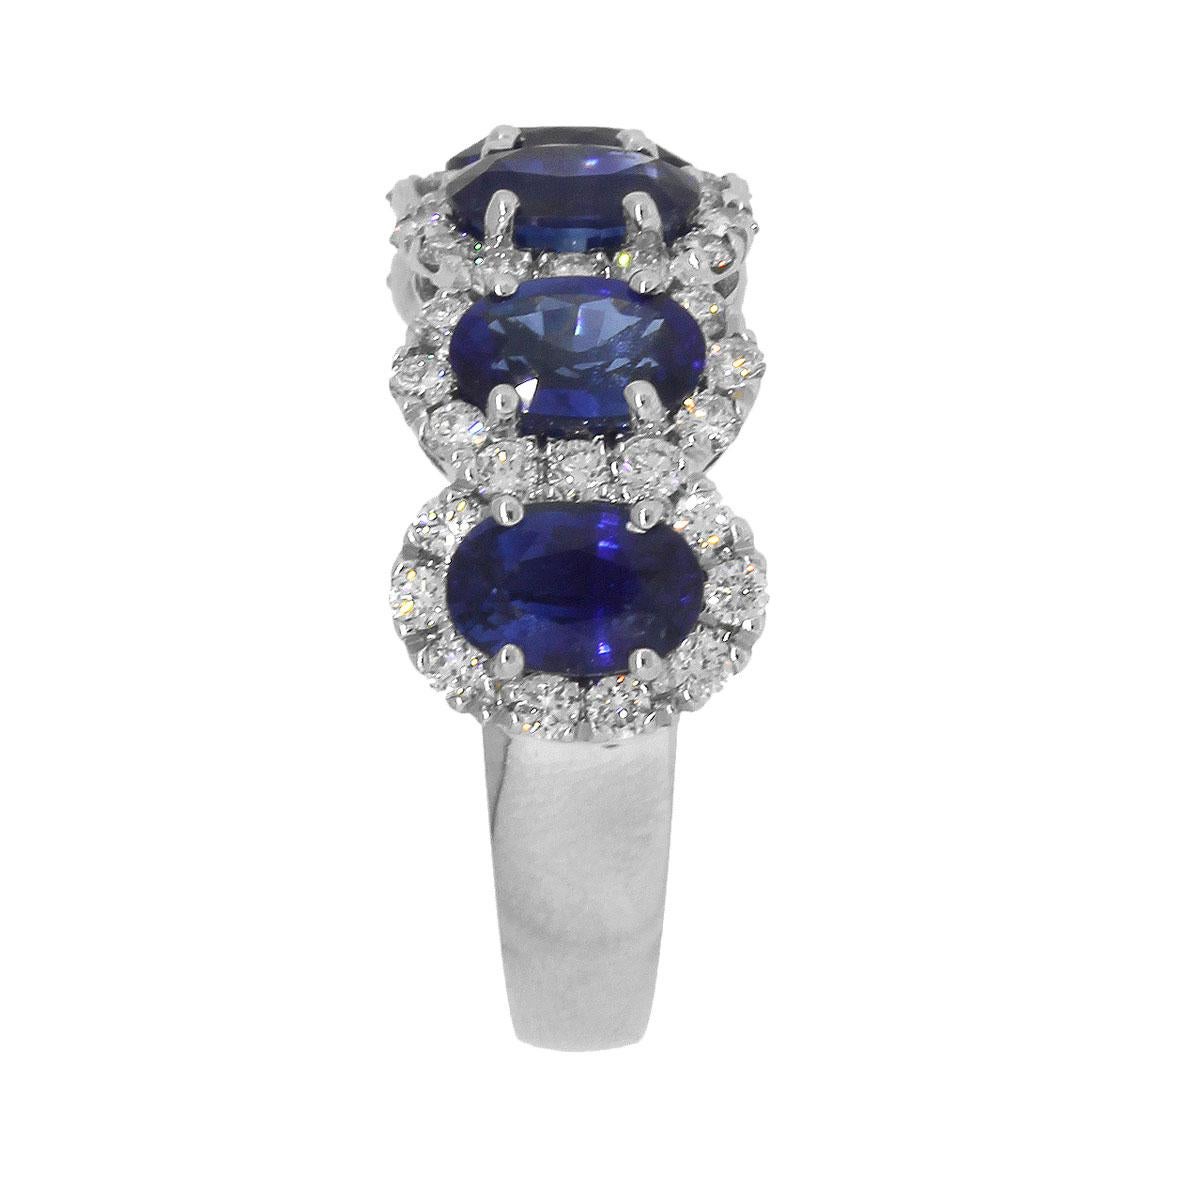 Material: 18k White Gold
Sapphire Details: Approximately 3ctw of Oval Sapphire Gemstones.
Diamond Halo Details: Approximately 0.60ctw of round brilliant diamonds. Diamonds are G/H in color and SI in clarity.
Size: 6.25
Total Weight: 6.5g